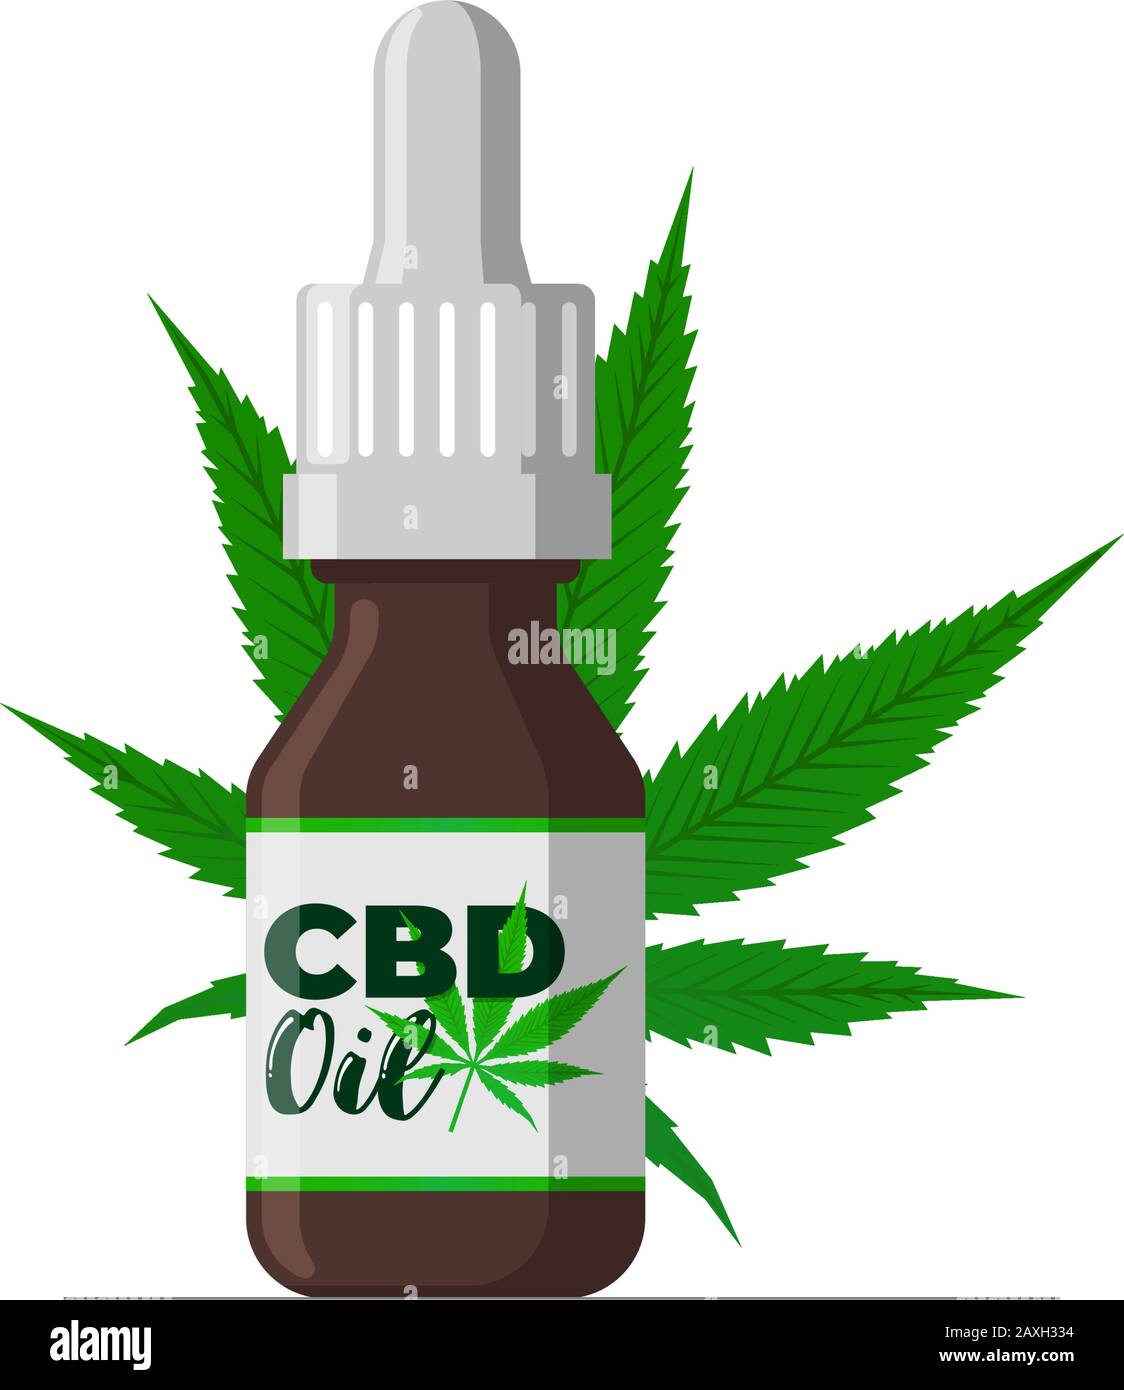 CBD hemp oil of medical cannabis extract in brown glass bottle. Marijuana leaf icon product jar label design template. Isolated flat vector illustration Stock Vector